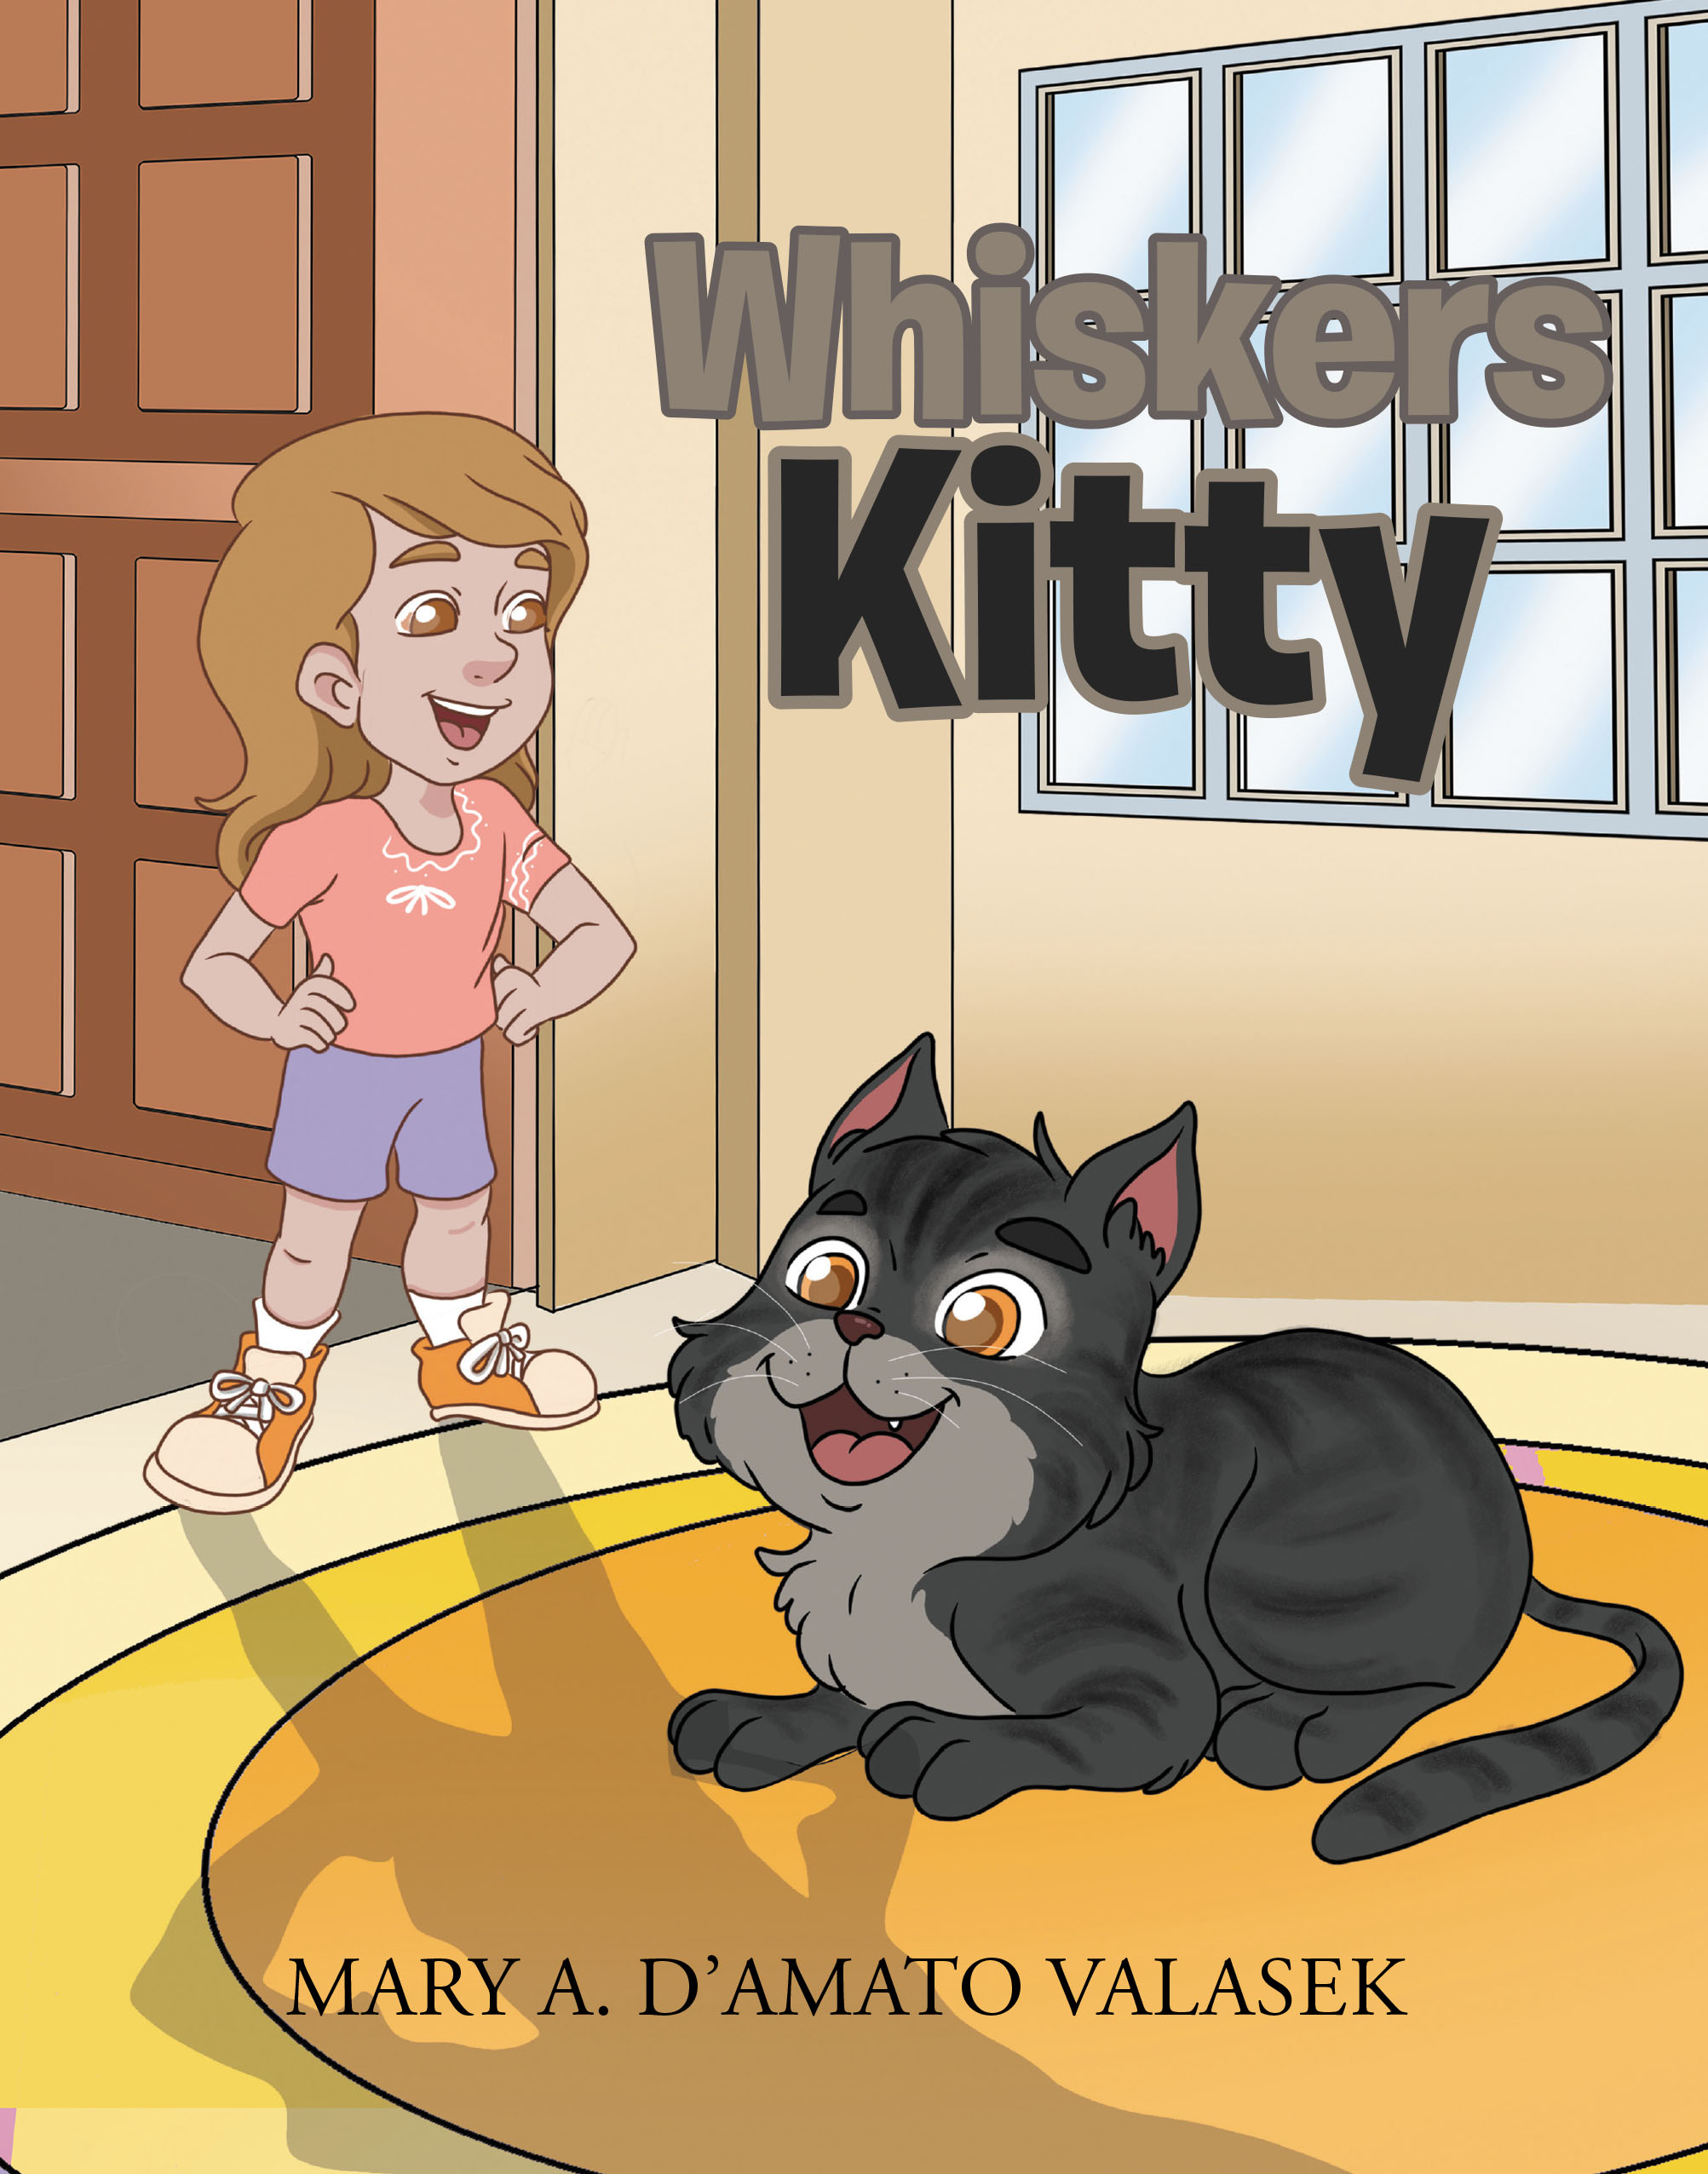 Author Mary A. D'Amato Valasek’s New Book, "Whiskers Kitty," is an Engaging Story That Centers Around a Young Girl Who Has One Simple Request for Her Kitten